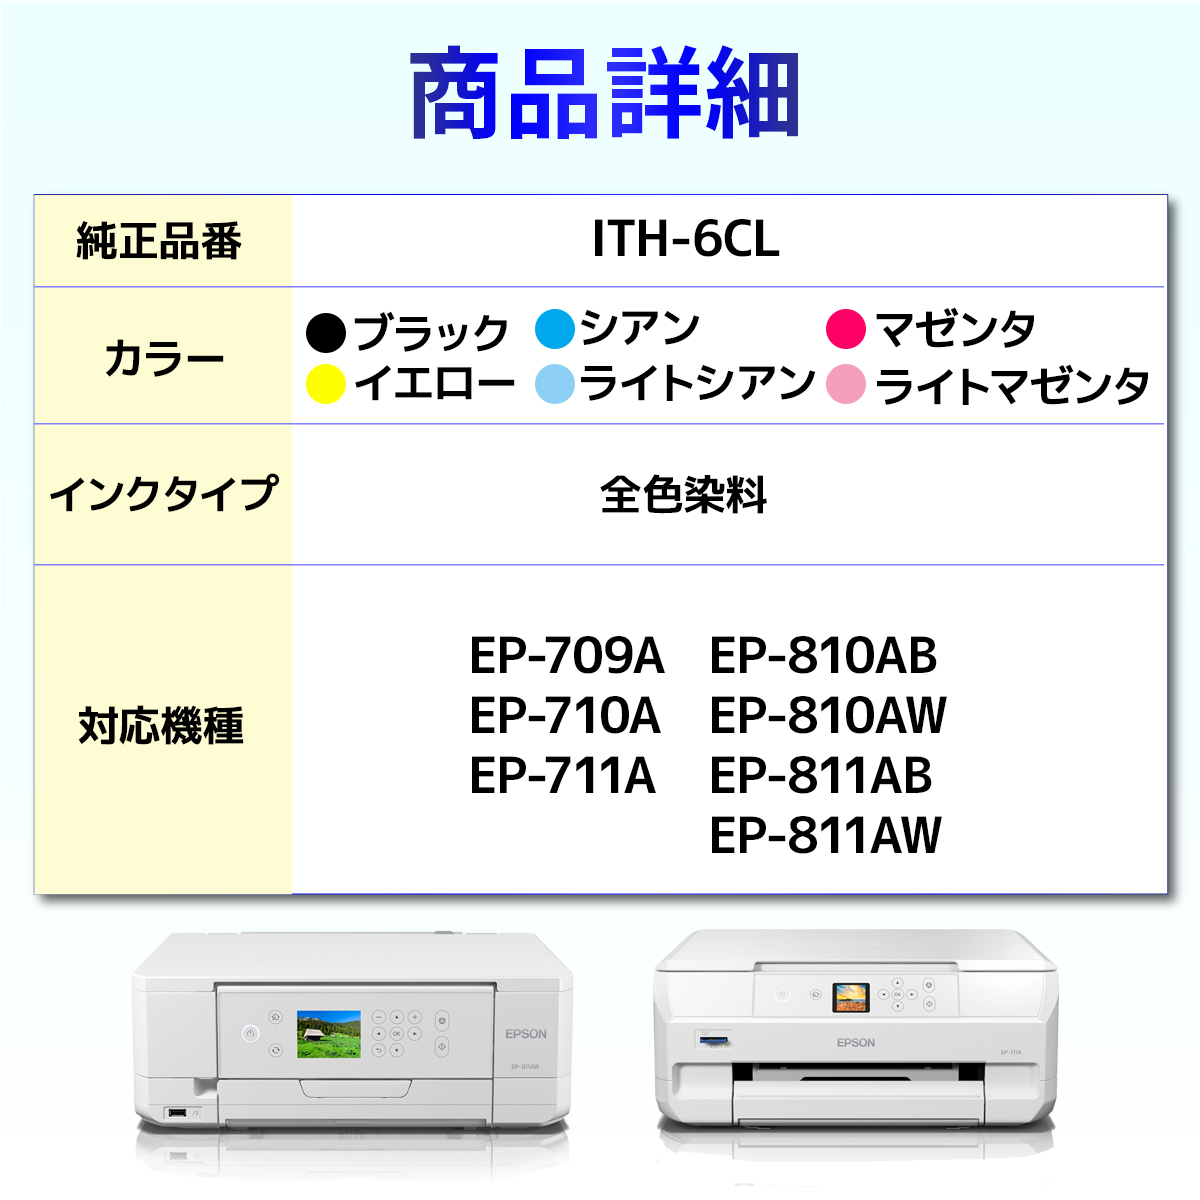 ITH-6CL ITH イチョウ 互換 インク EPSON エプソン ８個 EP-709A EP-710A EP-711A EP-810AB EP-810AW EP-811AB EP-811AW｜baustore｜03